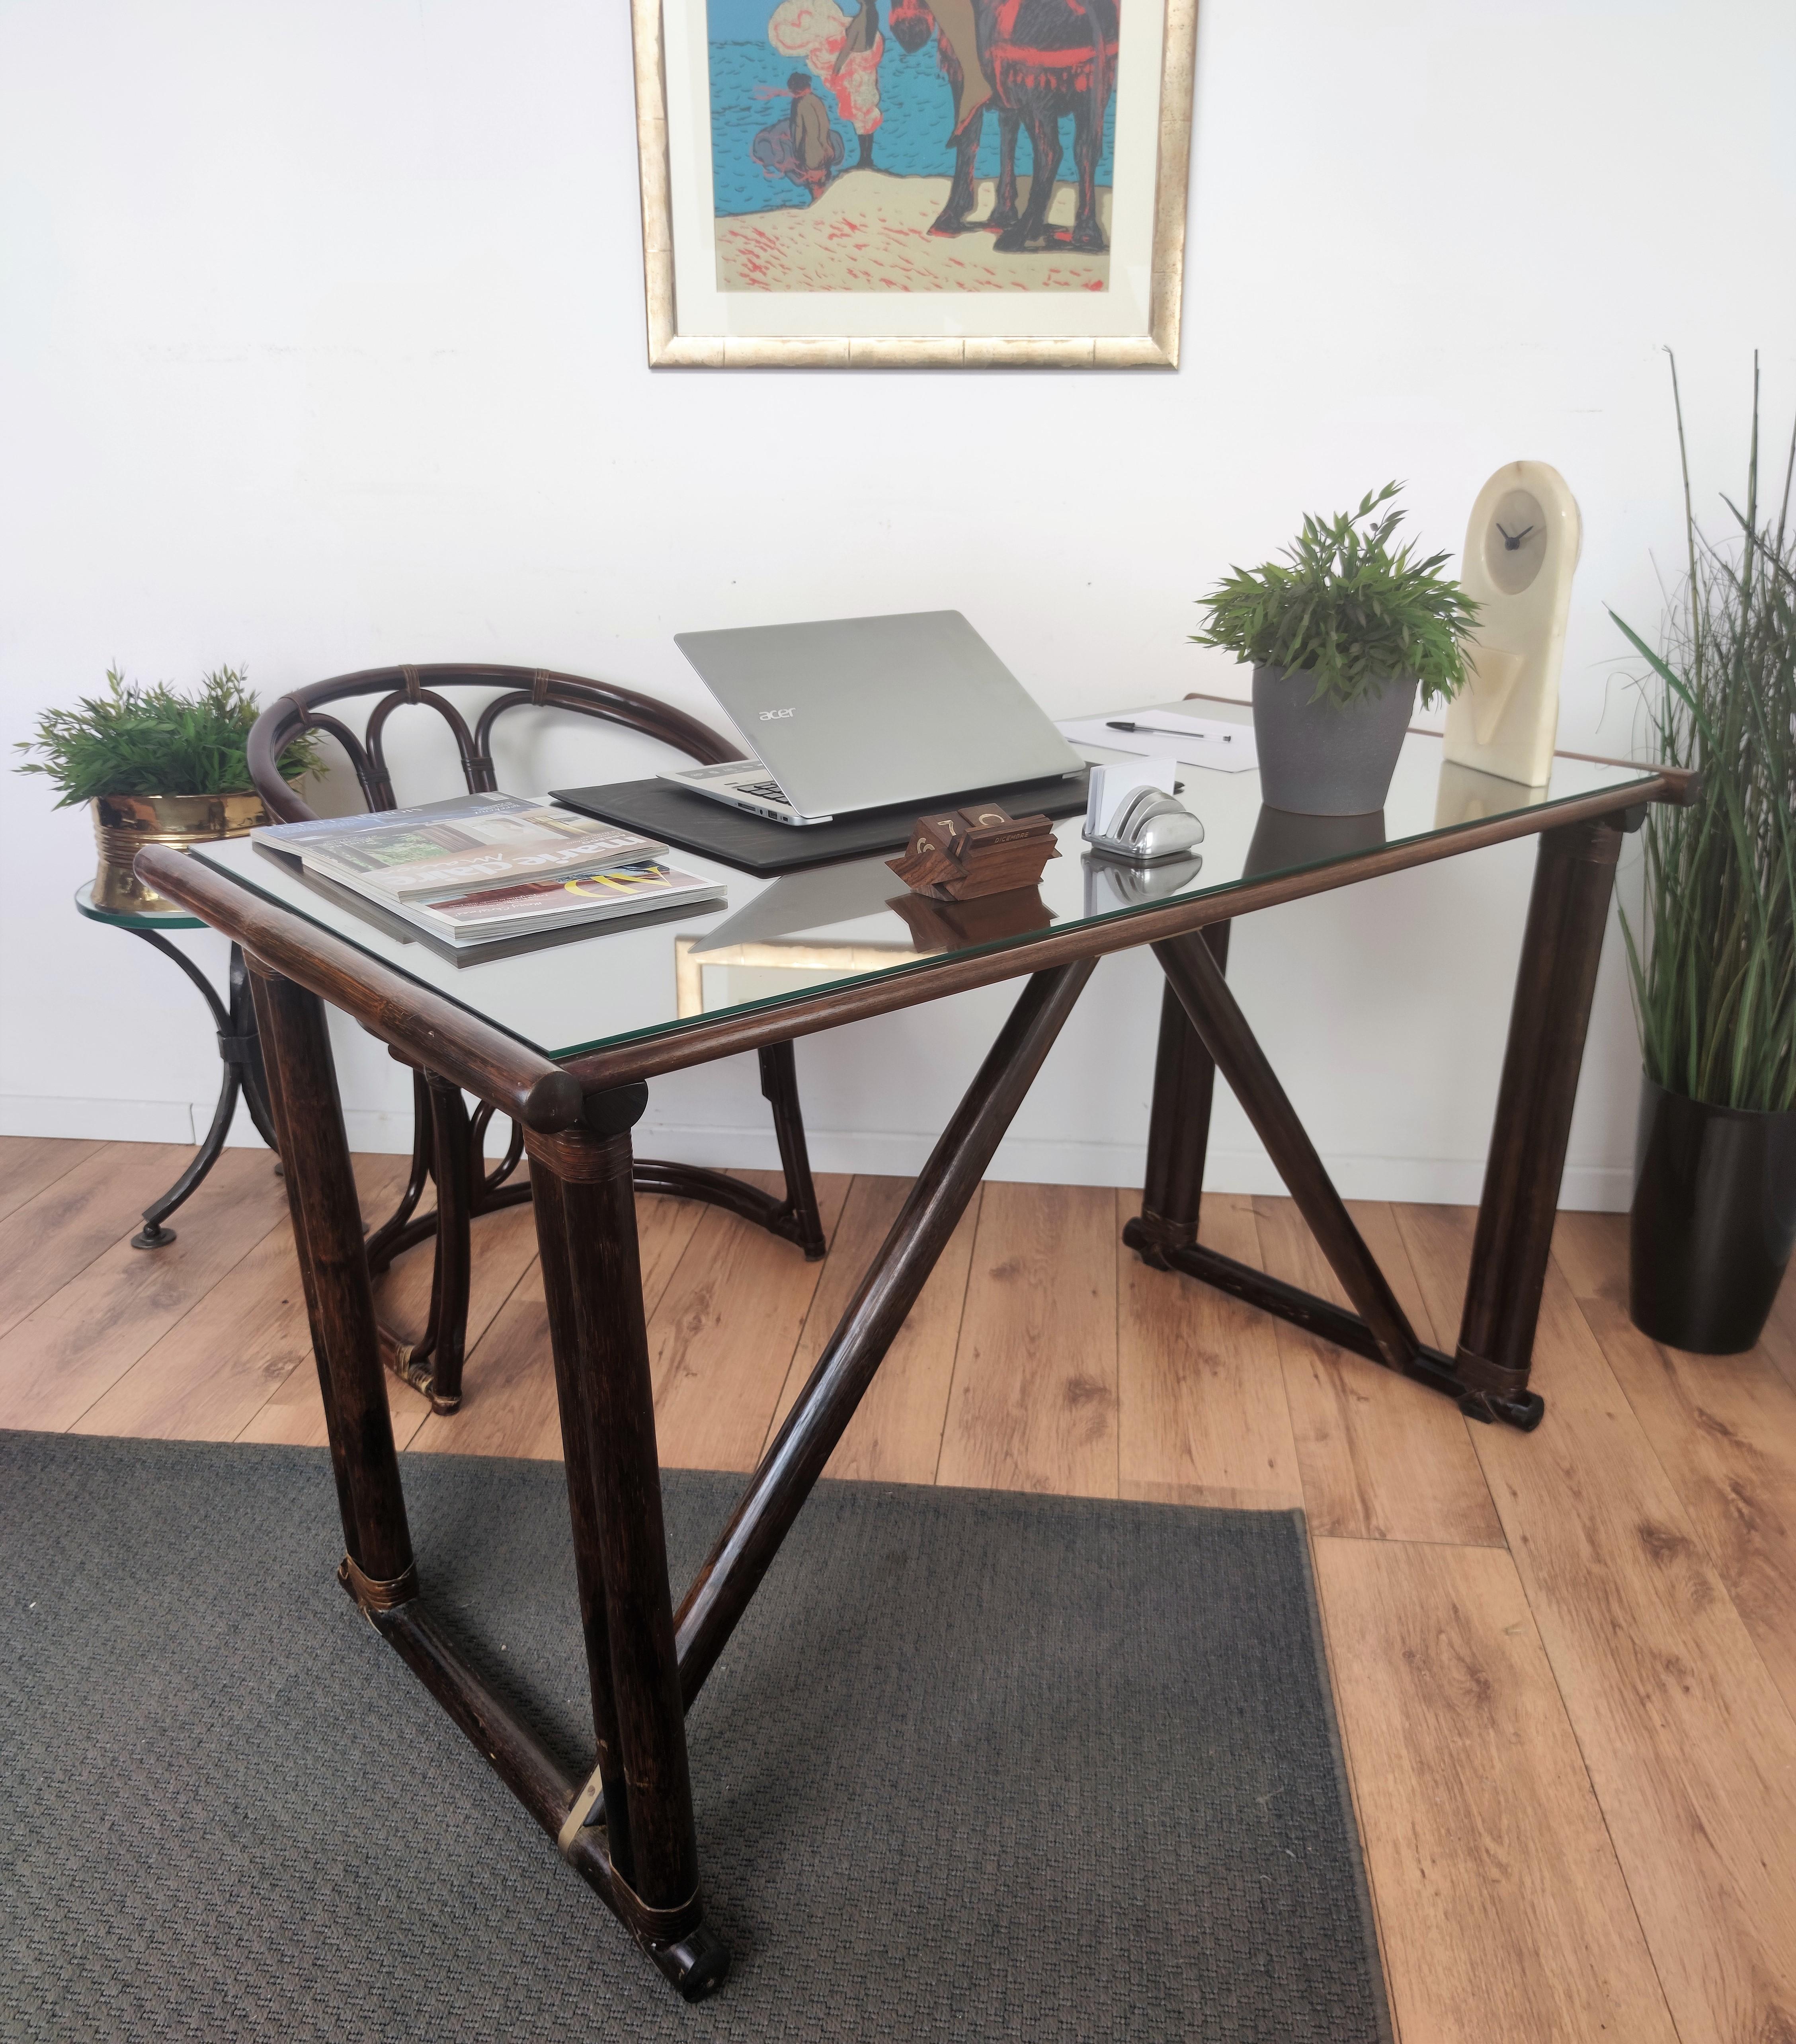 1950s Italian Mid-Century Modern Faux Bamboo Wooden Desk Writing Table and Chair In Good Condition For Sale In Carimate, Como